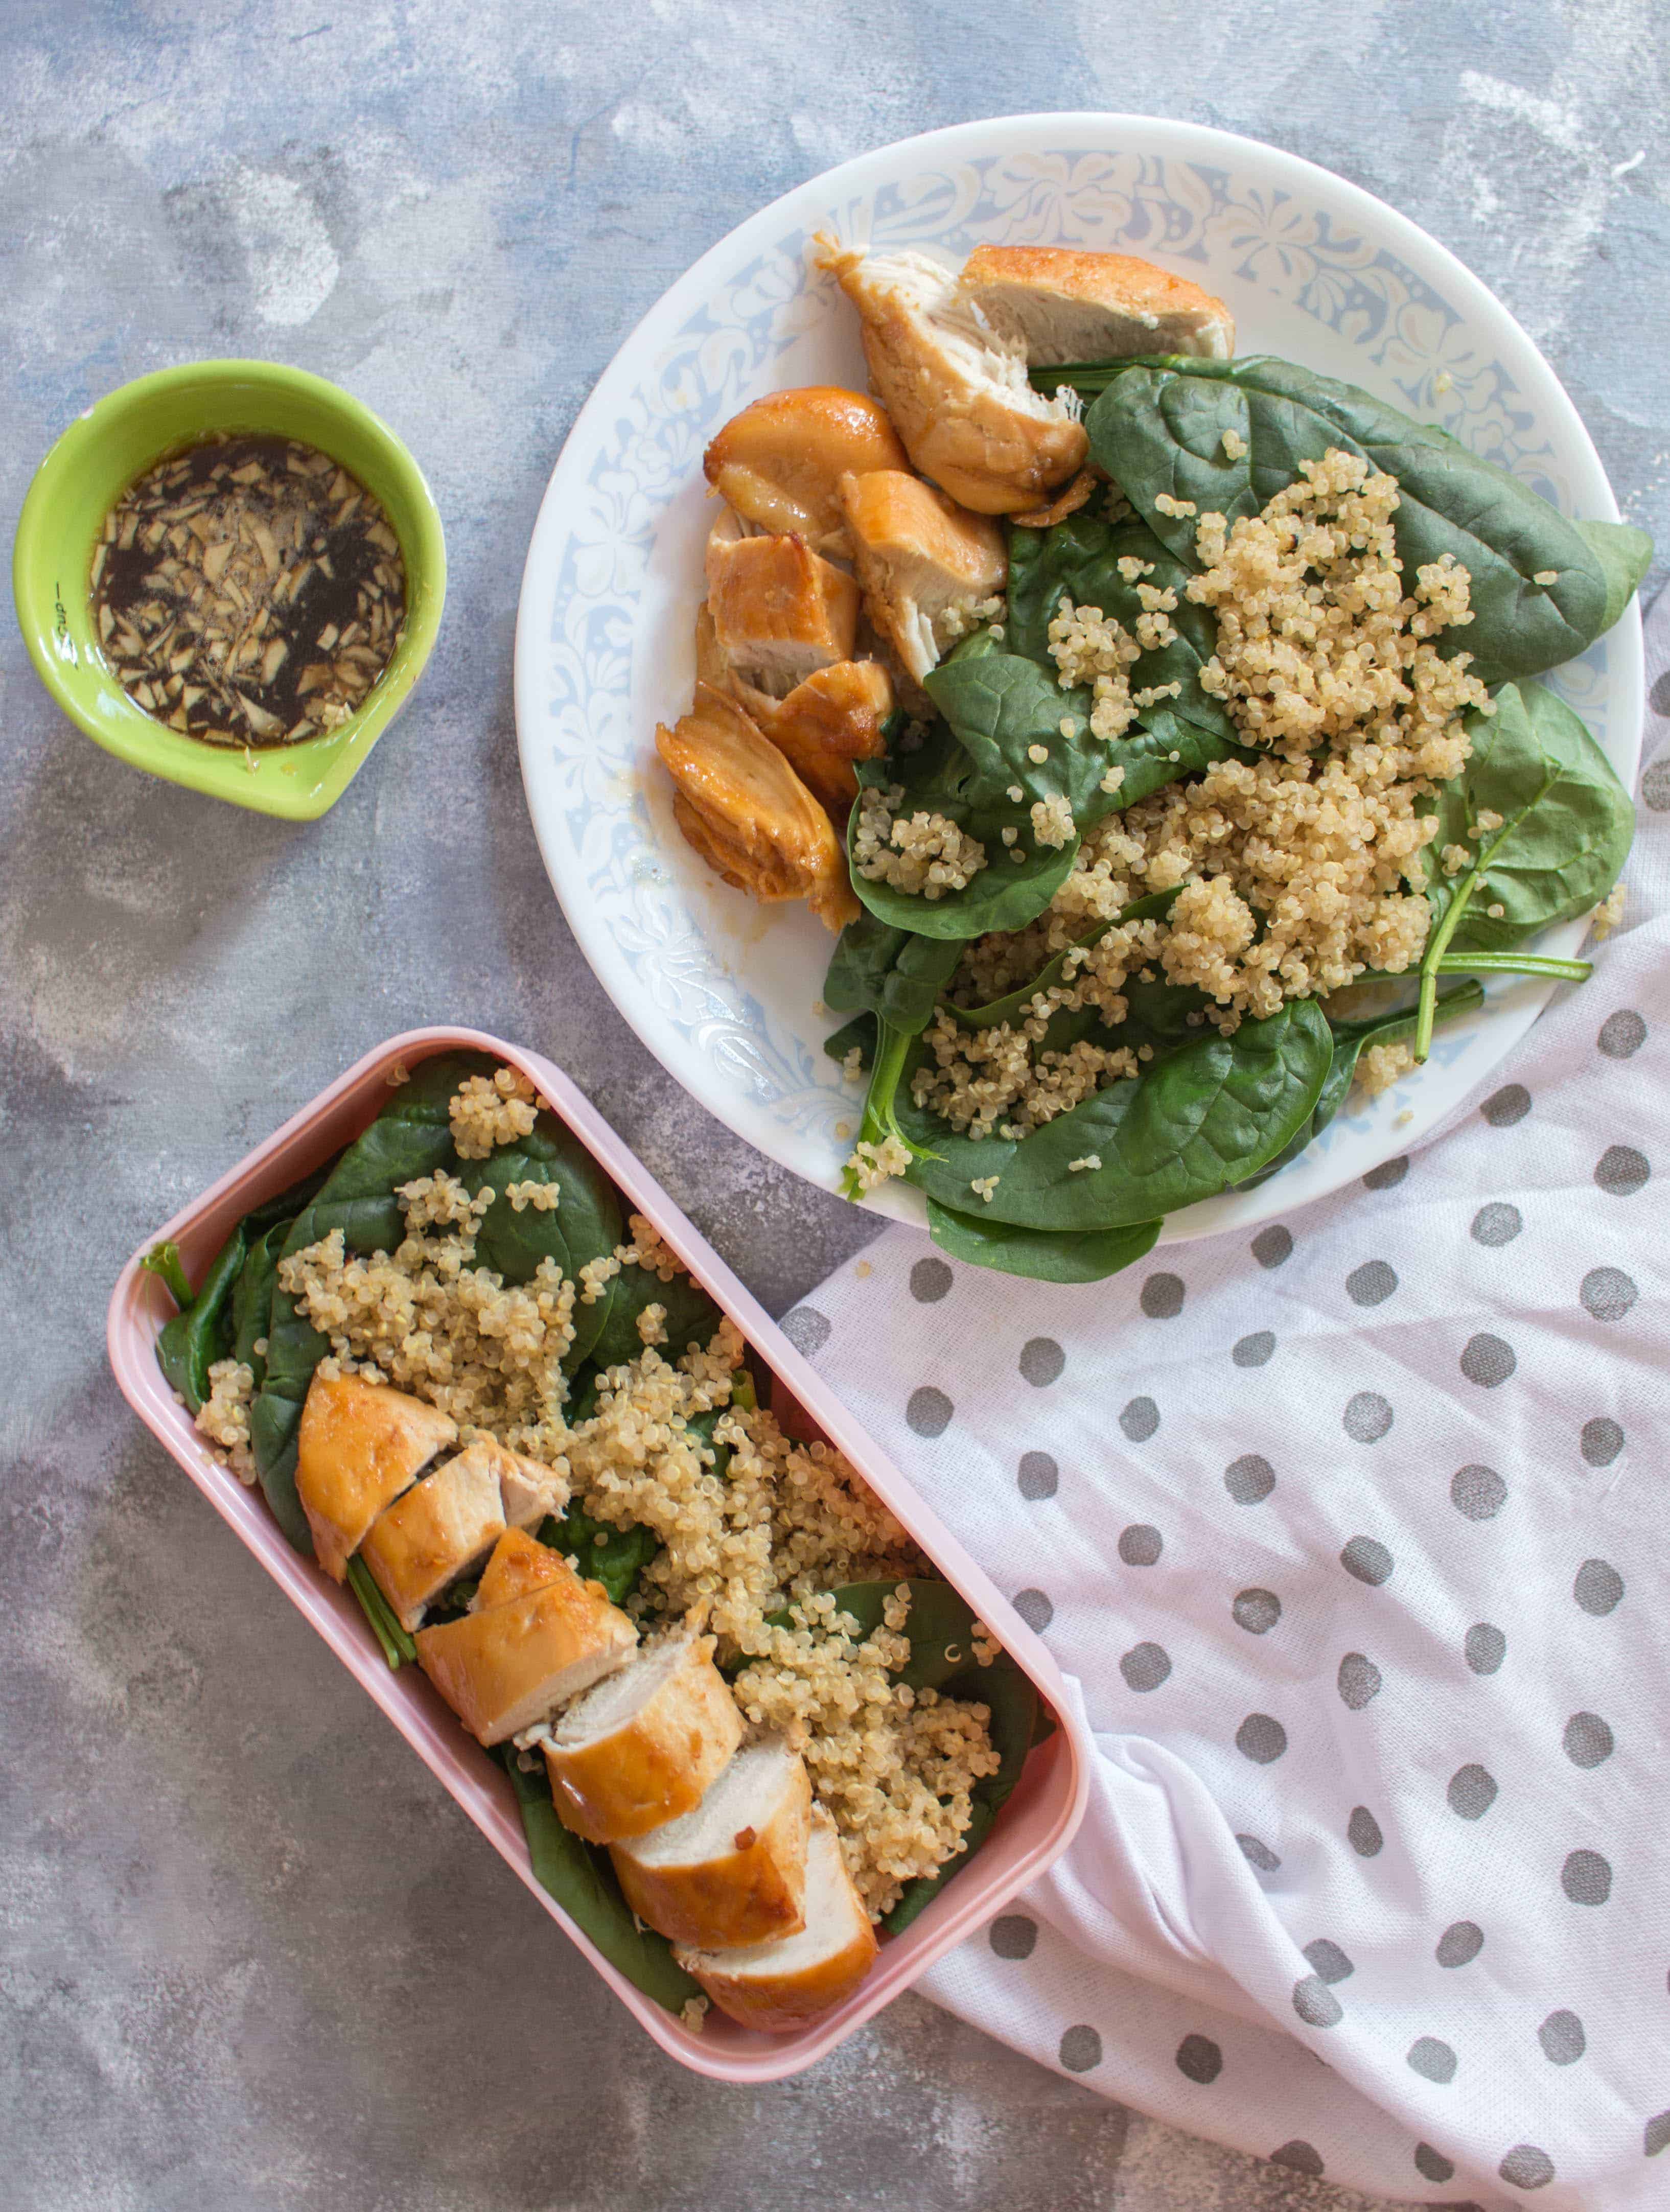 A delicious quinoa salad with honey garlic sriracha chicken that takes less than 40 minutes to make. This meal prep idea will get you excited for lunch time during your work week!